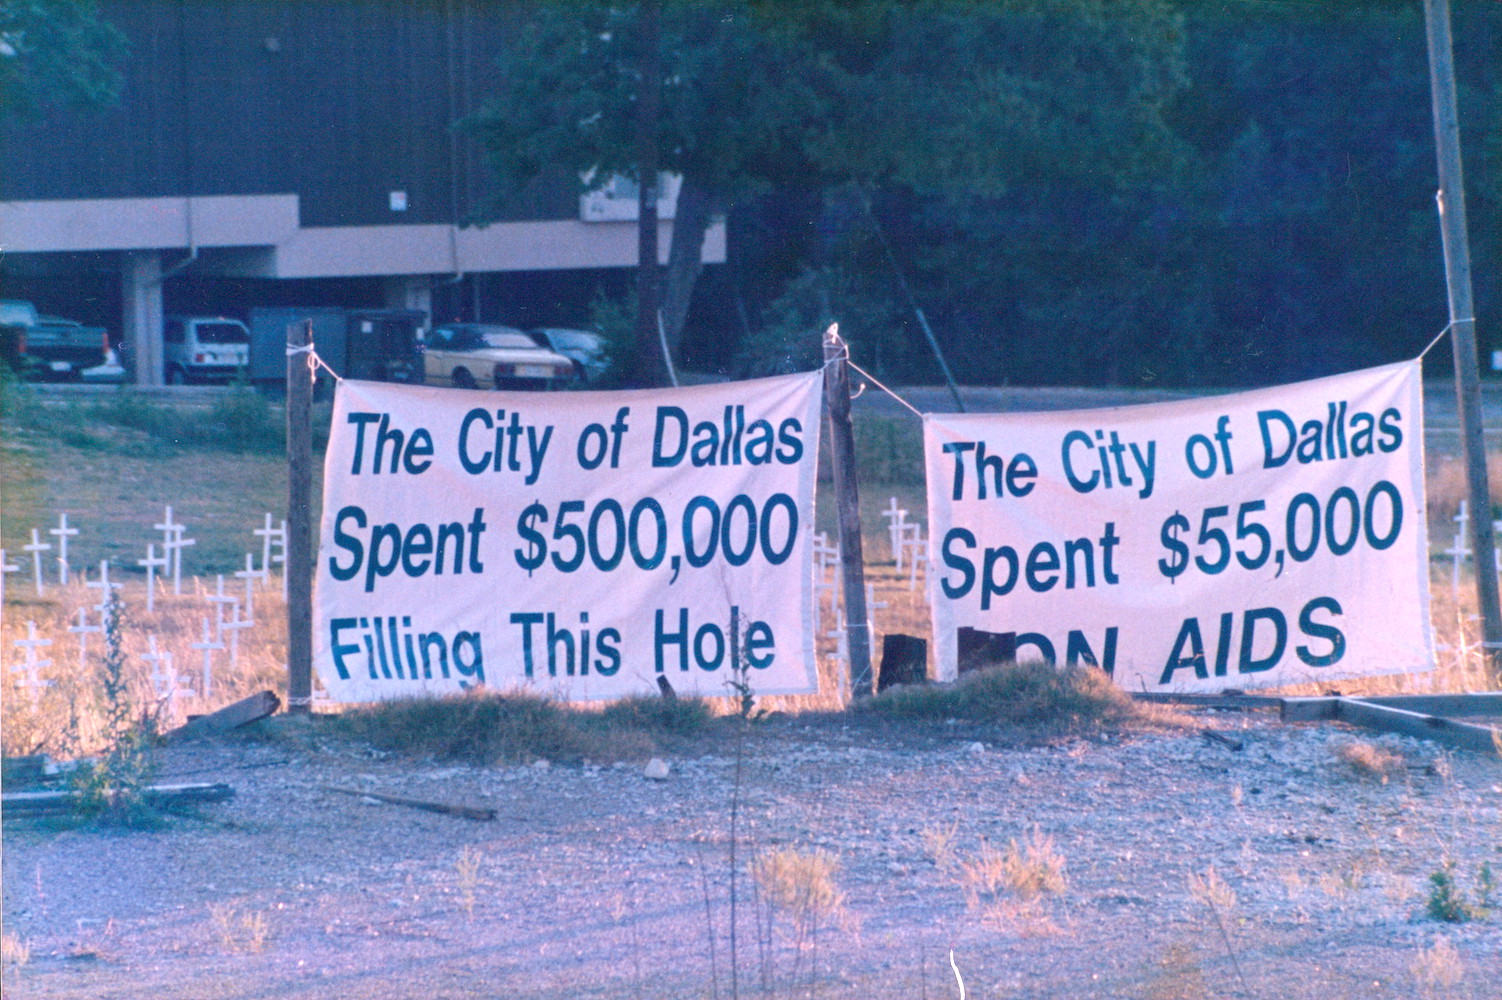 A vacant lot that gay activists turned into a potter’s field, Dallas, TX, 1986. William shares, “we highlighted the fact that the City of Dallas had spent $500,000 filling it with dirt while having only spent only $55,000 on AIDS that same year. We also turned the vacant lot into a field of crosses symbolizing each person that had died of AIDS in Dallas County -- almost 700.” Photo courtesy of William Waybourn.